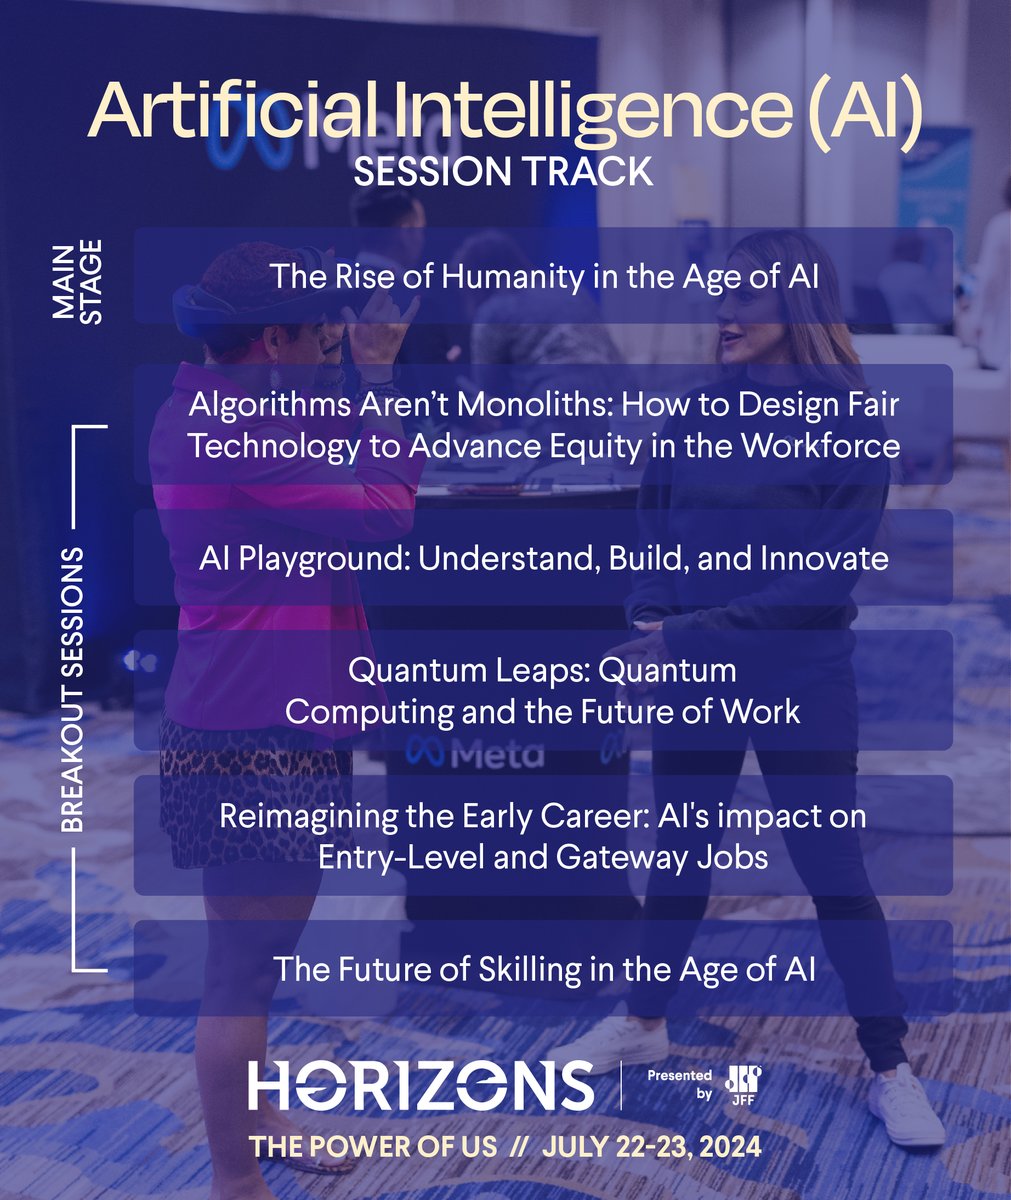 Announcing the AI track at #JFFHorizons! Join us July 22-23 in DC for a main stage featuring LinkedIn’s Aneesh Raman & Human Trust’s Vivienne Ming. Explore AI's future in breakout sessions on the future of AI, skilling, equity and more. Register now at jfflink.org/4bGLvcG